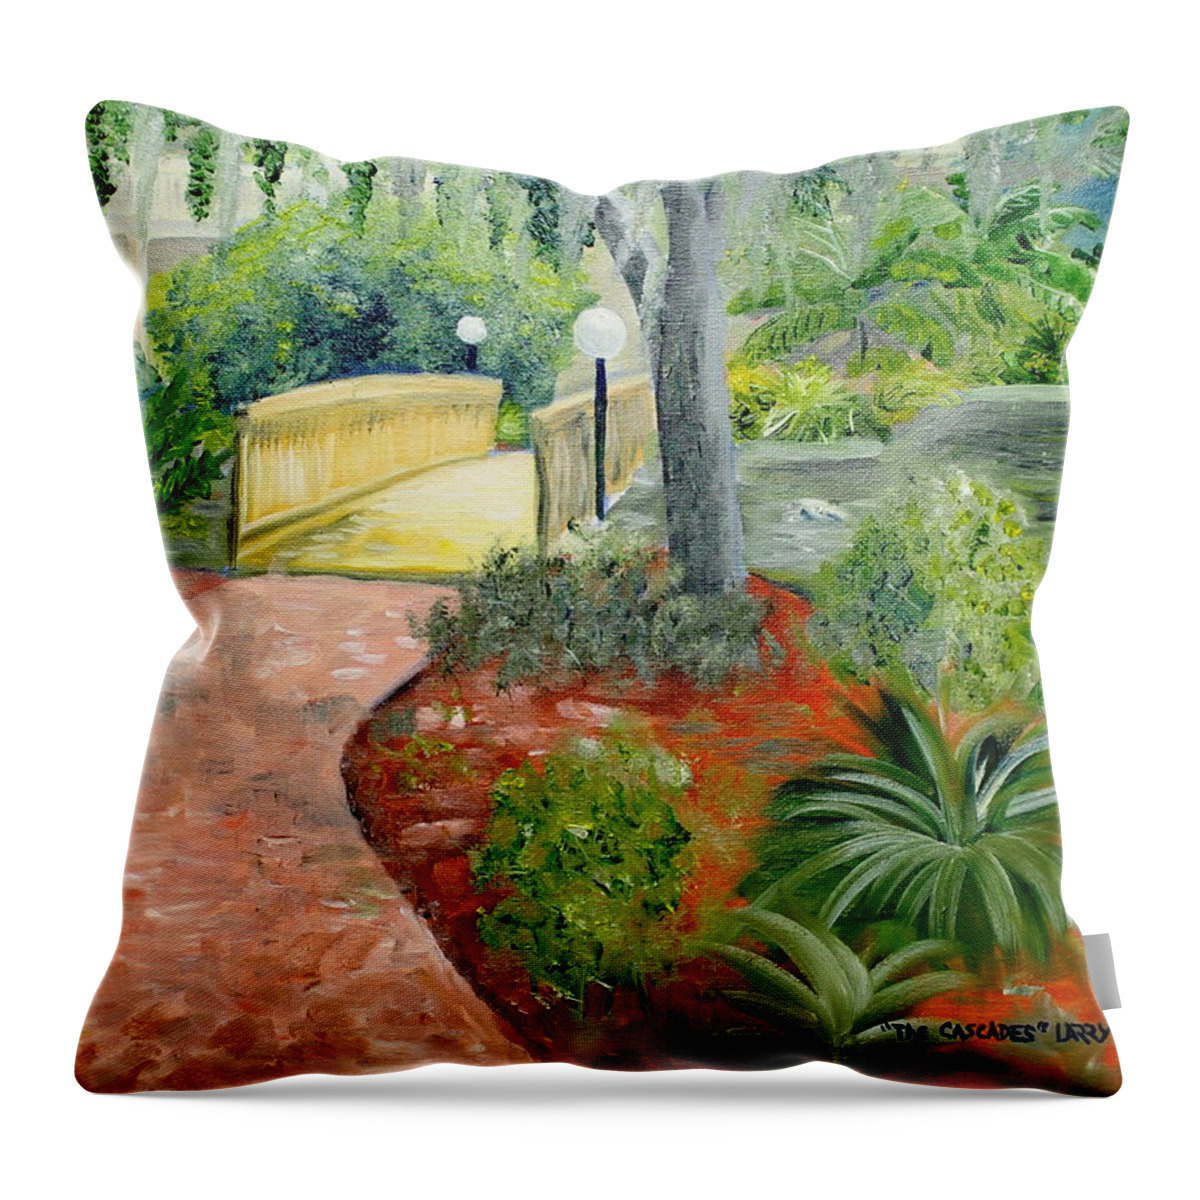 Landscape Throw Pillow featuring the painting The Cascades by Larry Whitler